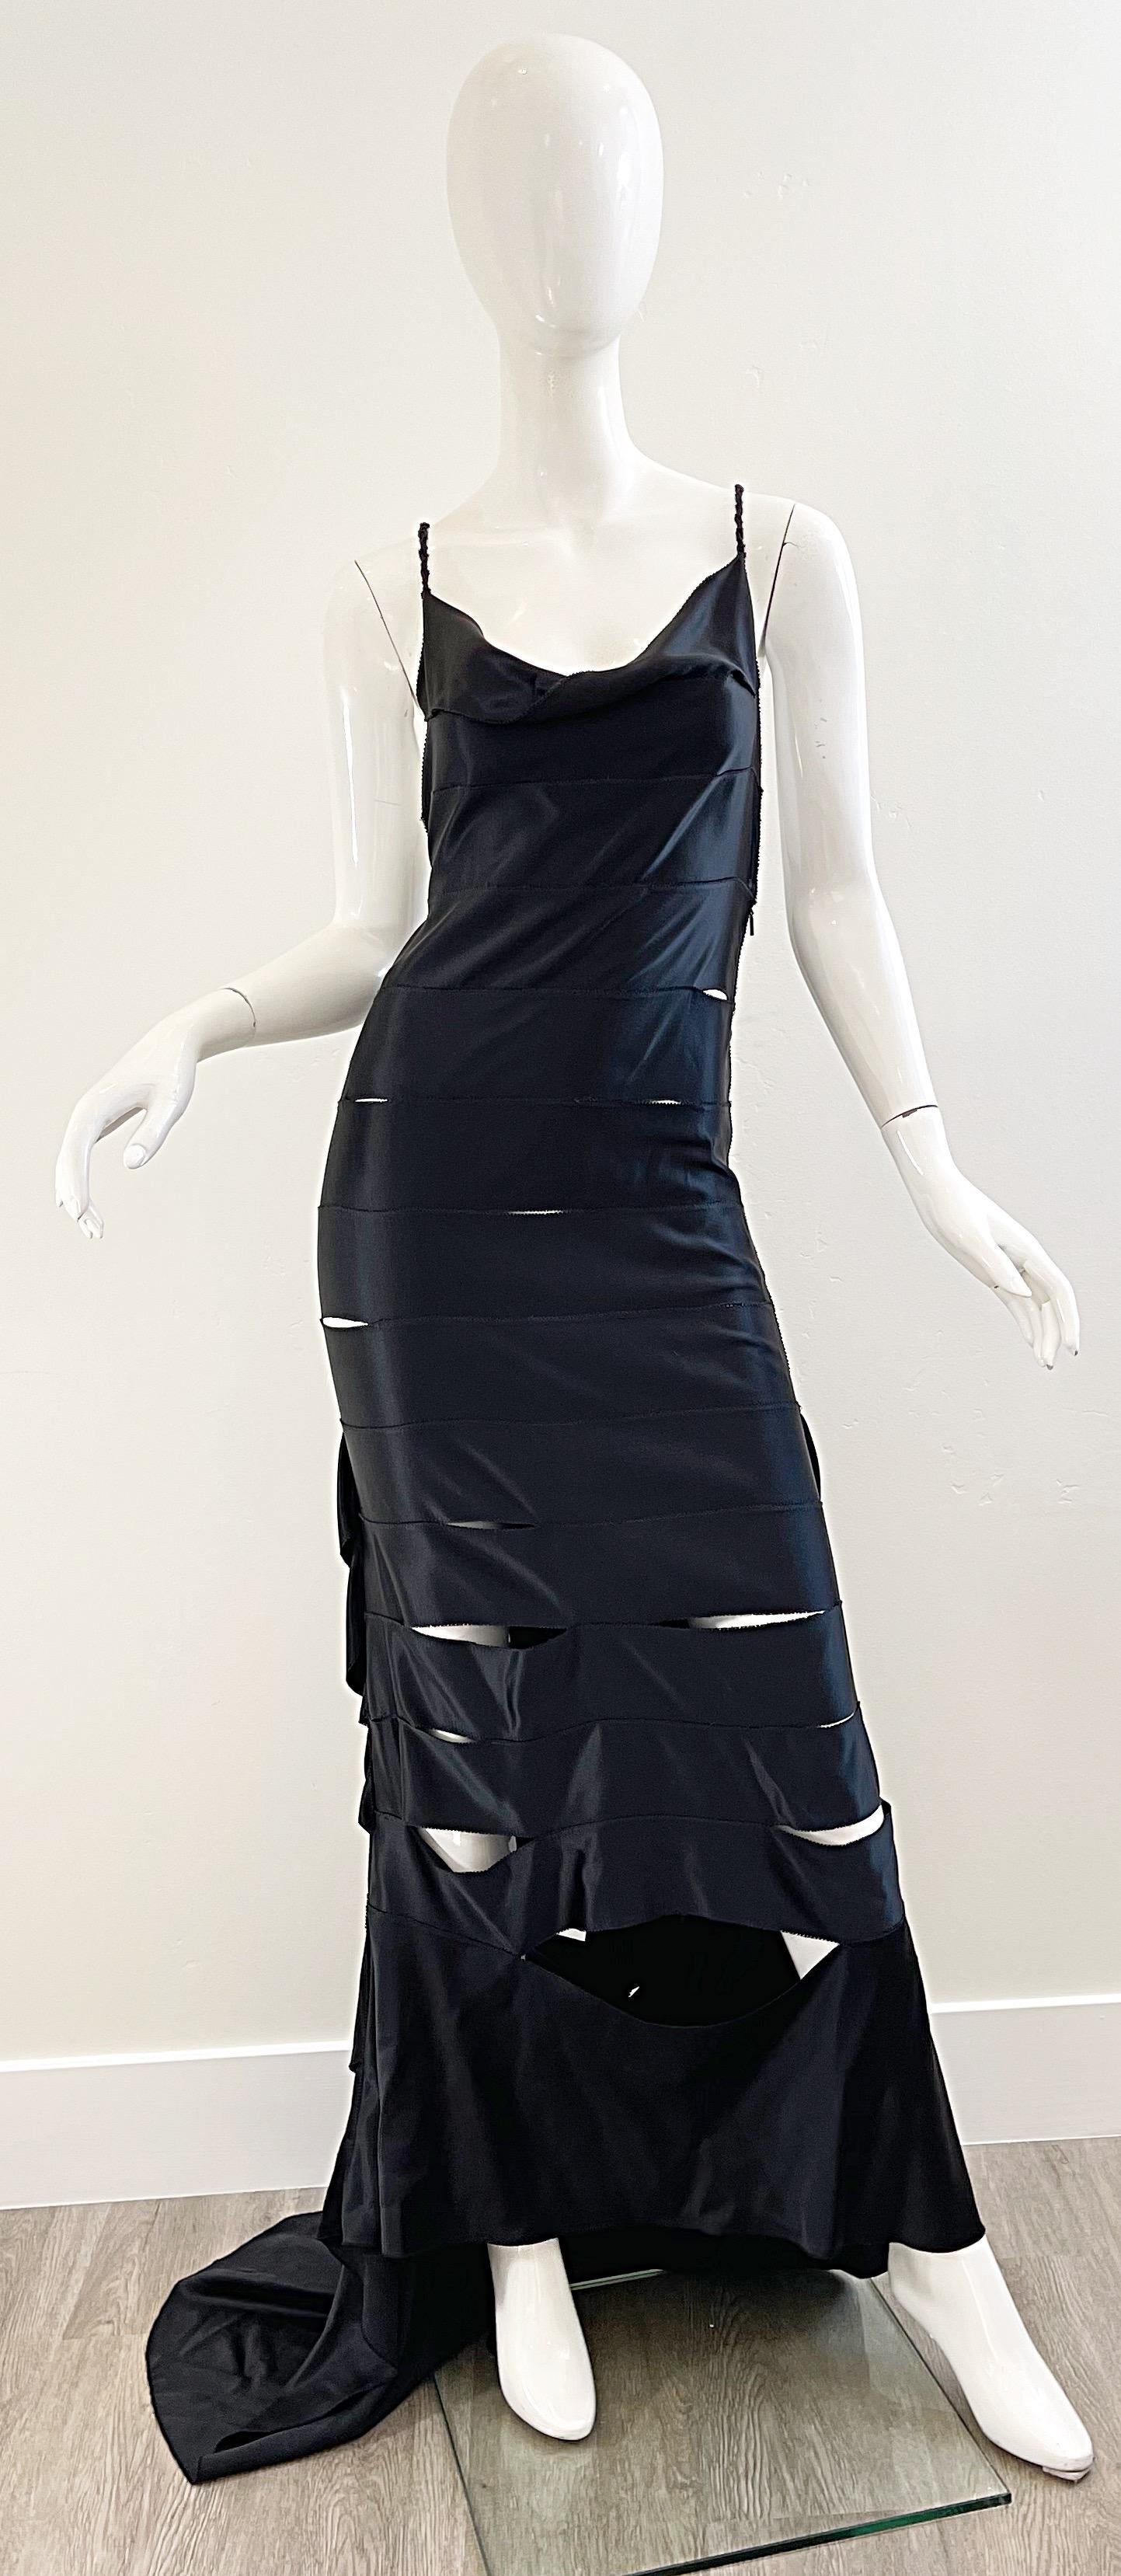 Sexy GUCCI by TOM FORD Fall / Winter 2002 vintage black silk cut-out evening gown ! Features a tailored bodice with braided racerback. Shredded look reveals just the right amount of skin. Hidden zipper up the side with hook-and-eye closure.